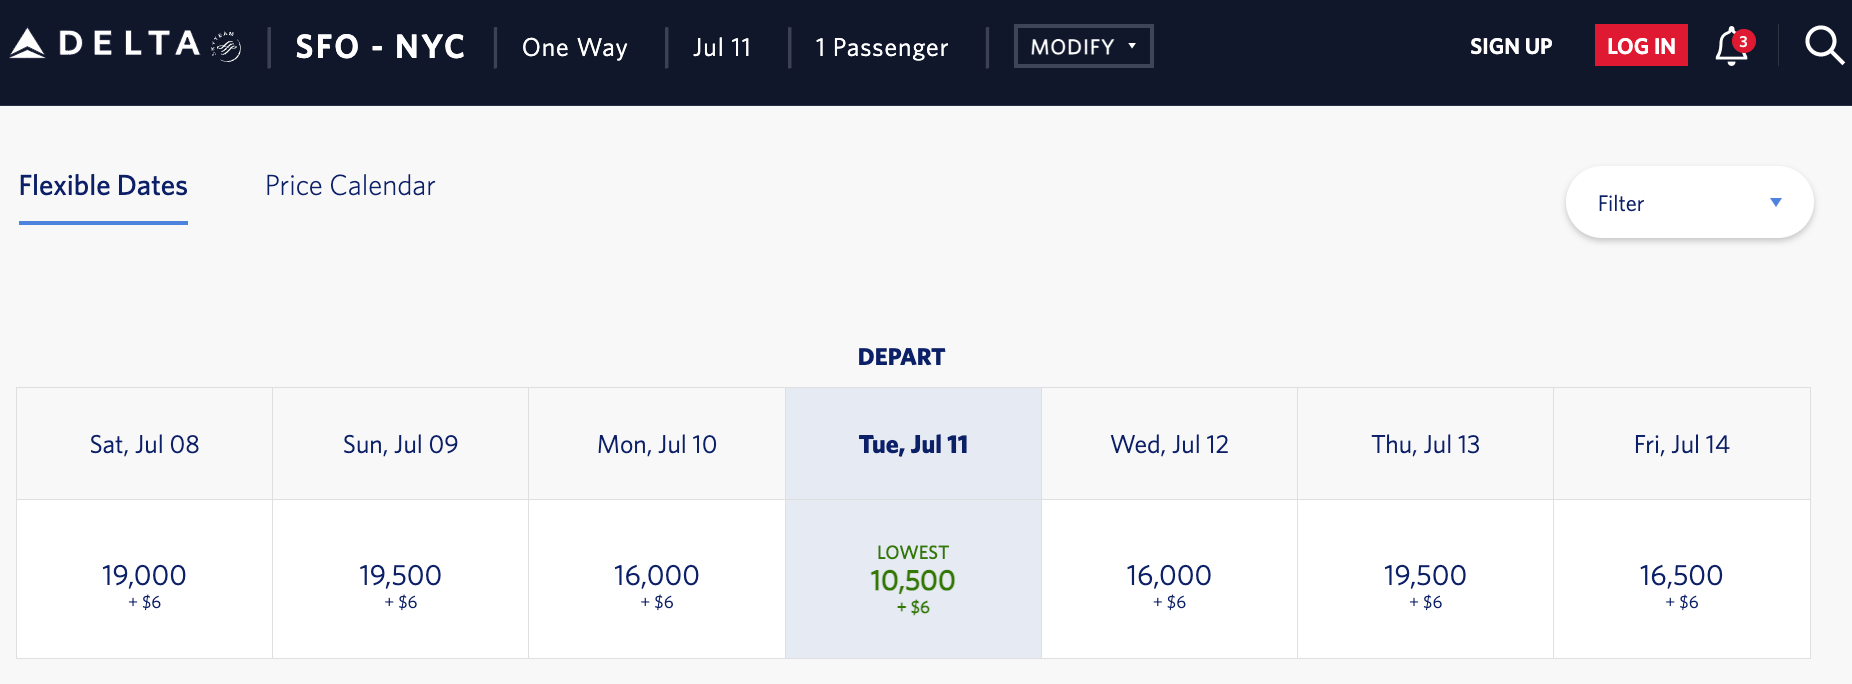 Delta weekly award prices from SFO to NYC